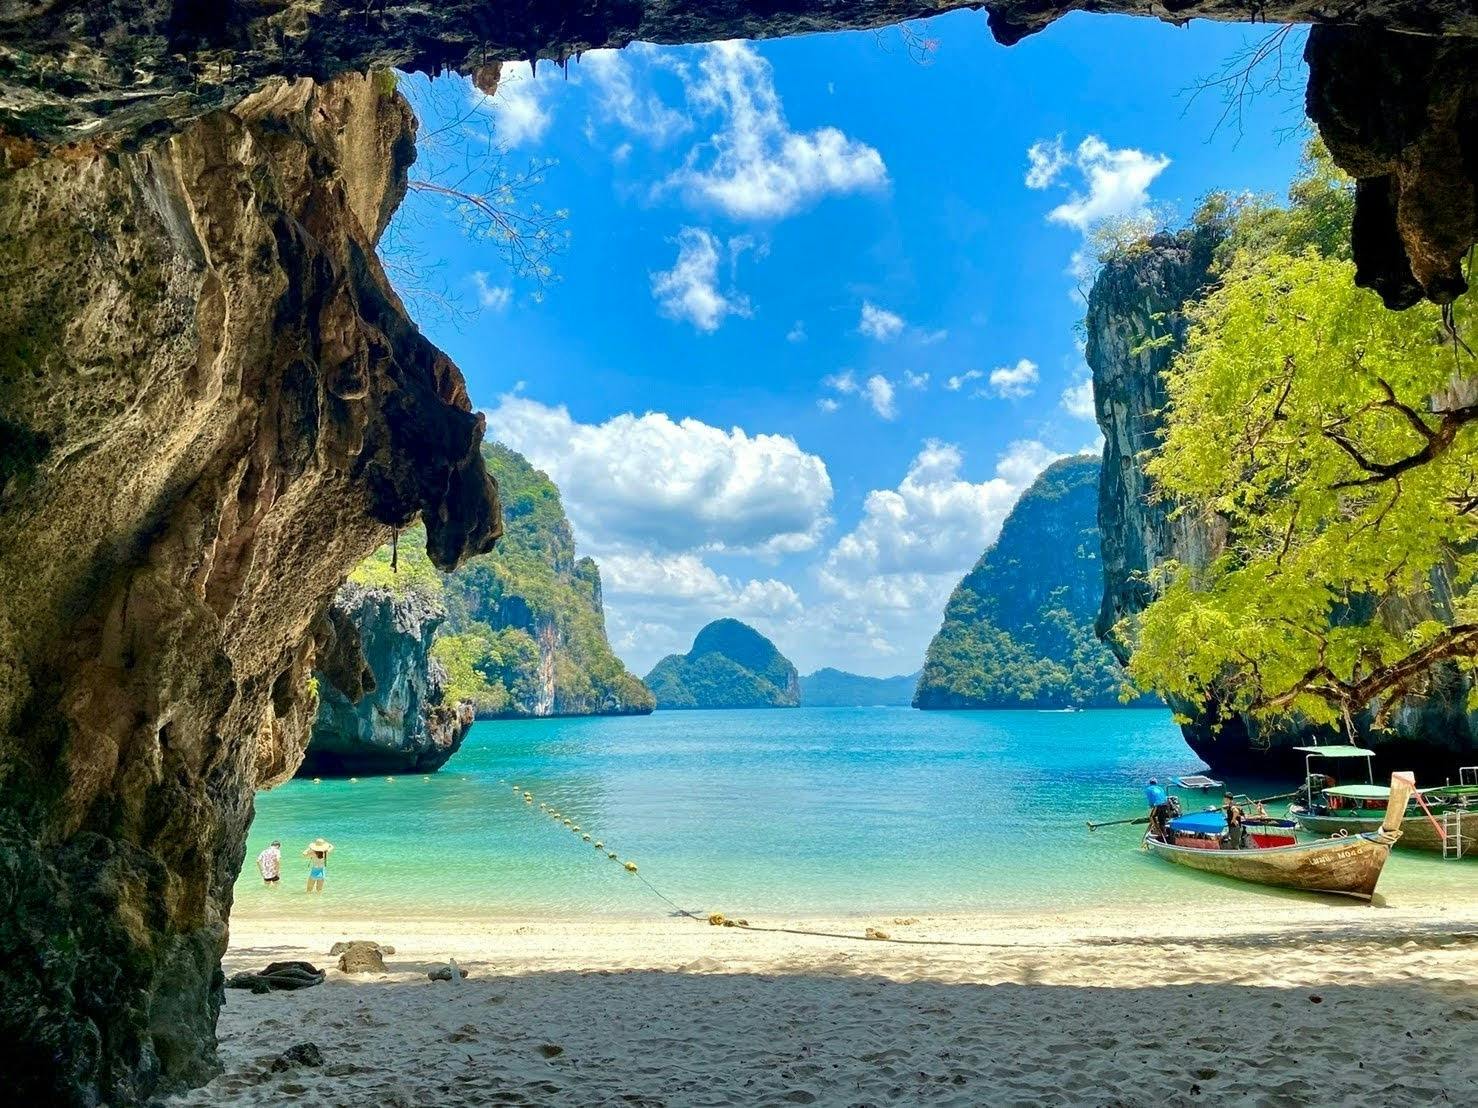 Hong Island snorkelling boat tour with 360° viewpoint from Krabi Musement